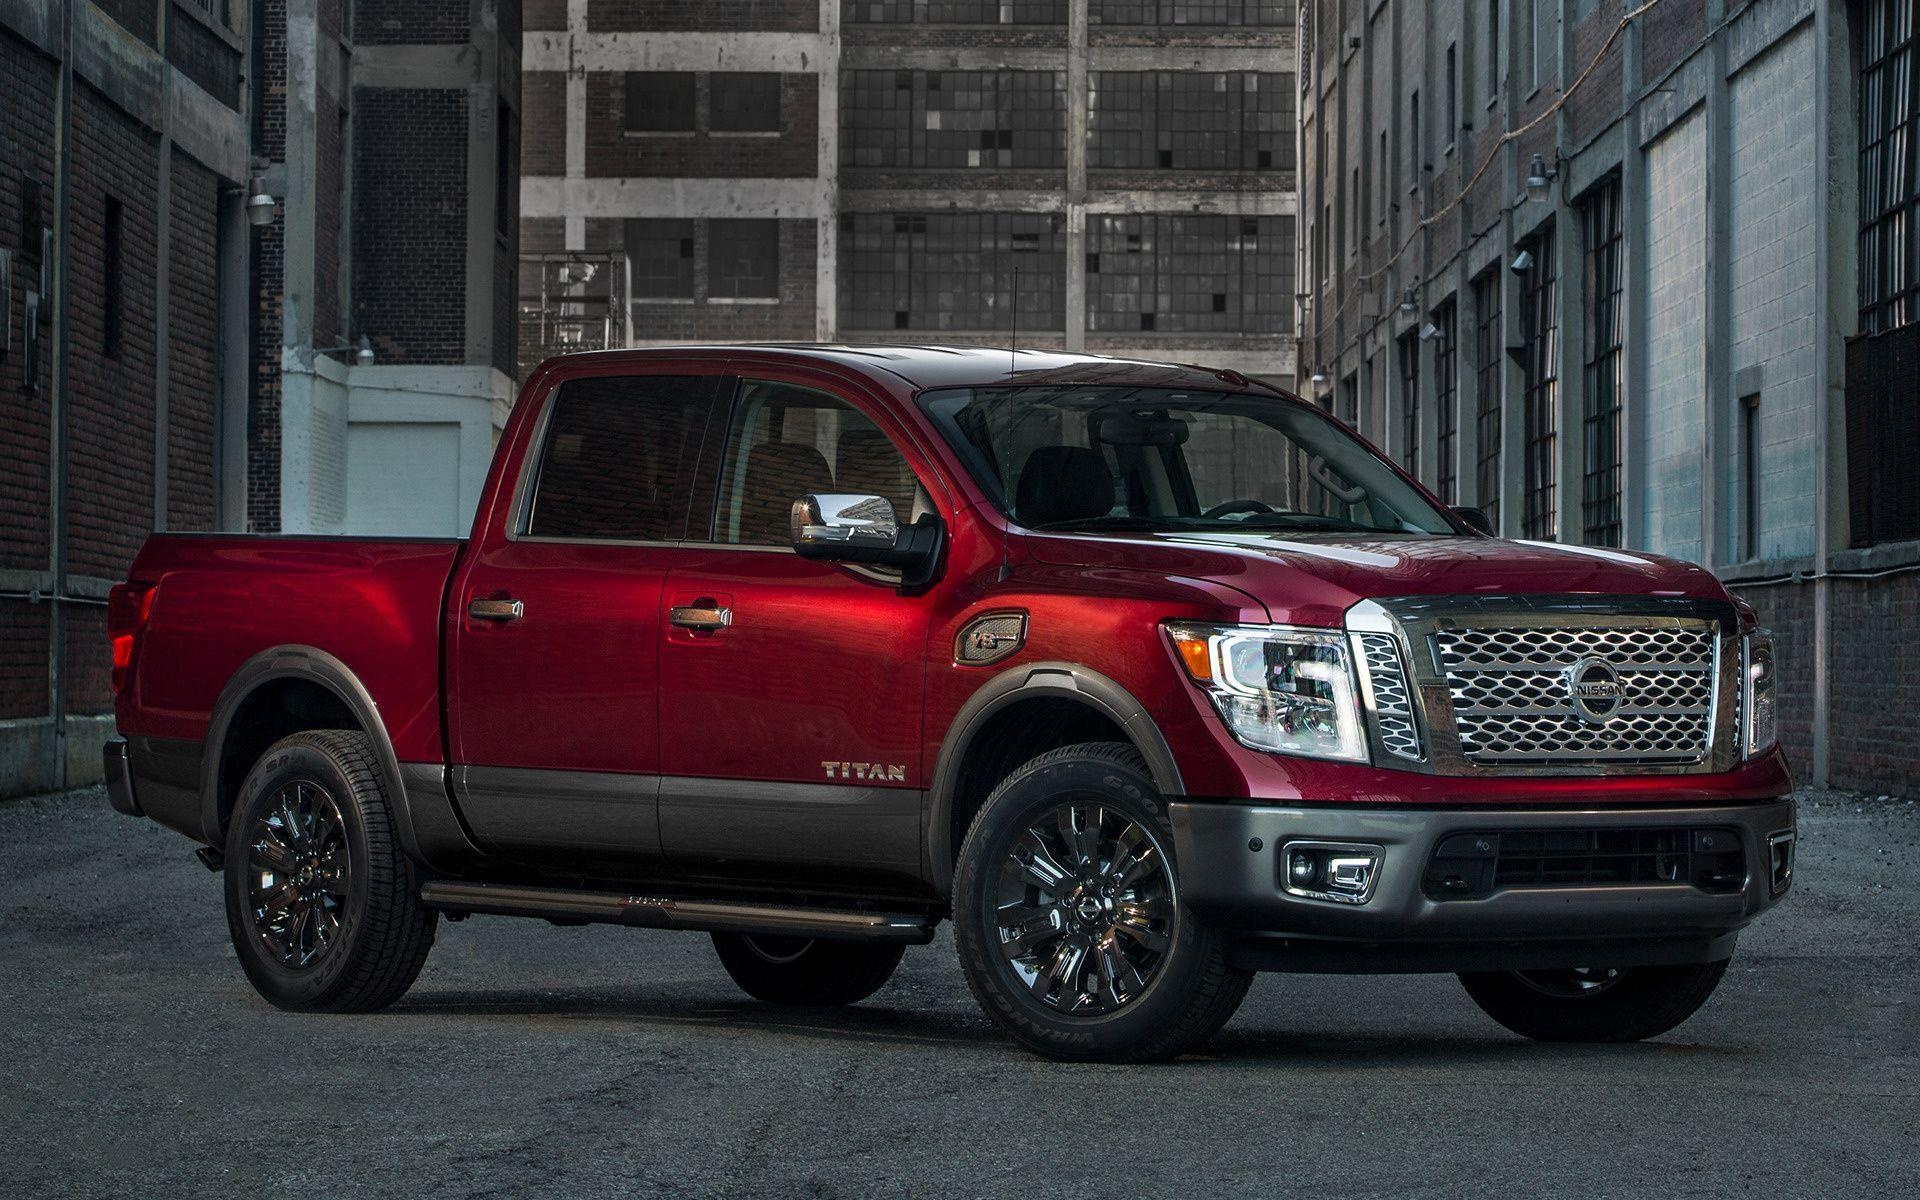 Nissan Titan, Powerful wallpapers, Unmatched strength, Automotive excellence, 1920x1200 HD Desktop